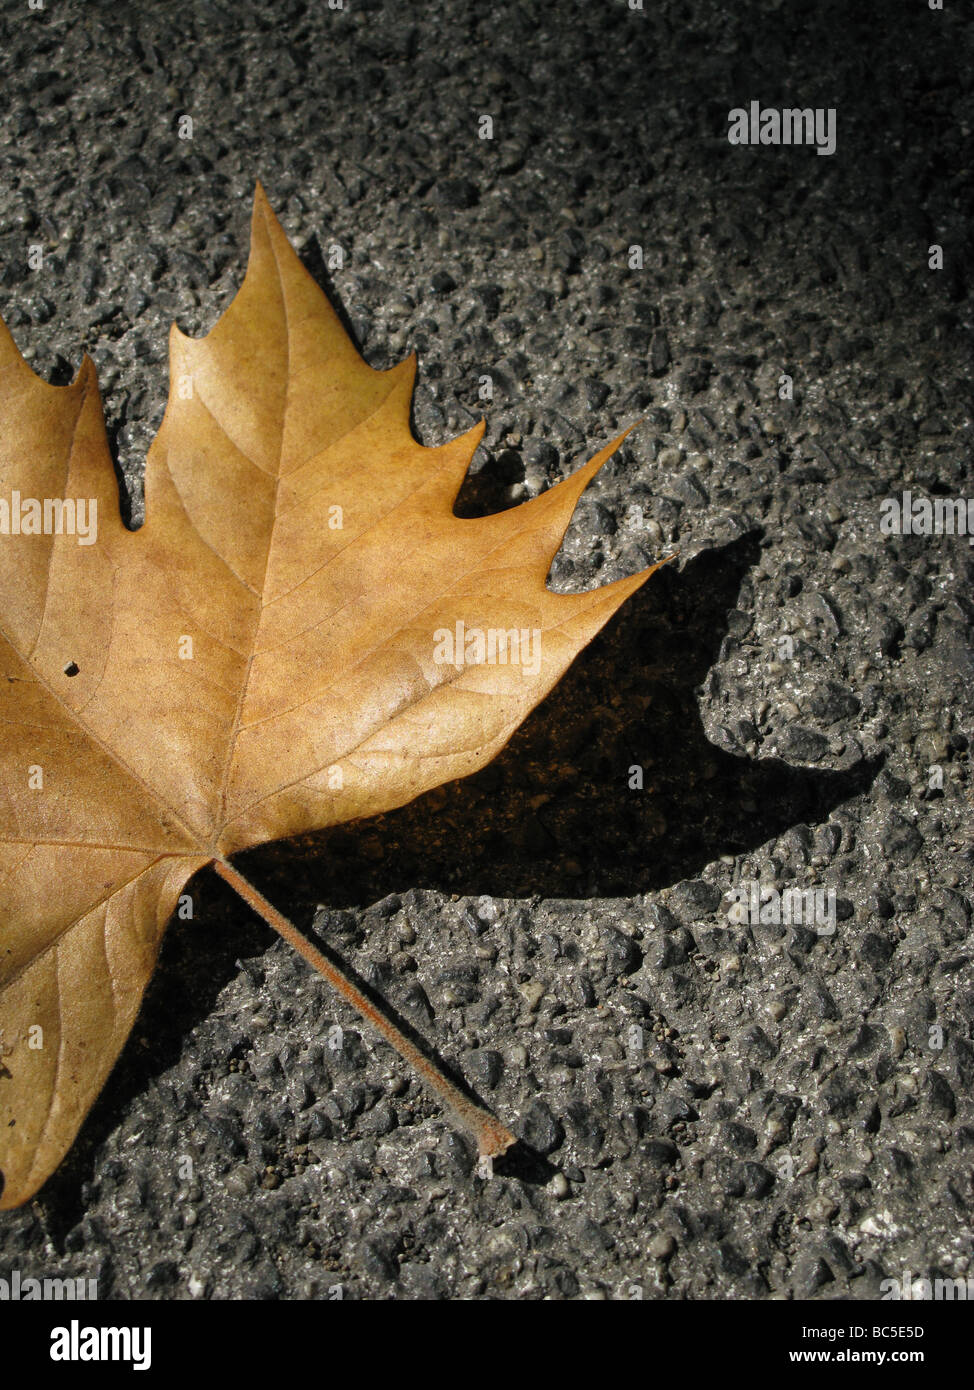 one single  fallen brown leaf on road surface Stock Photo